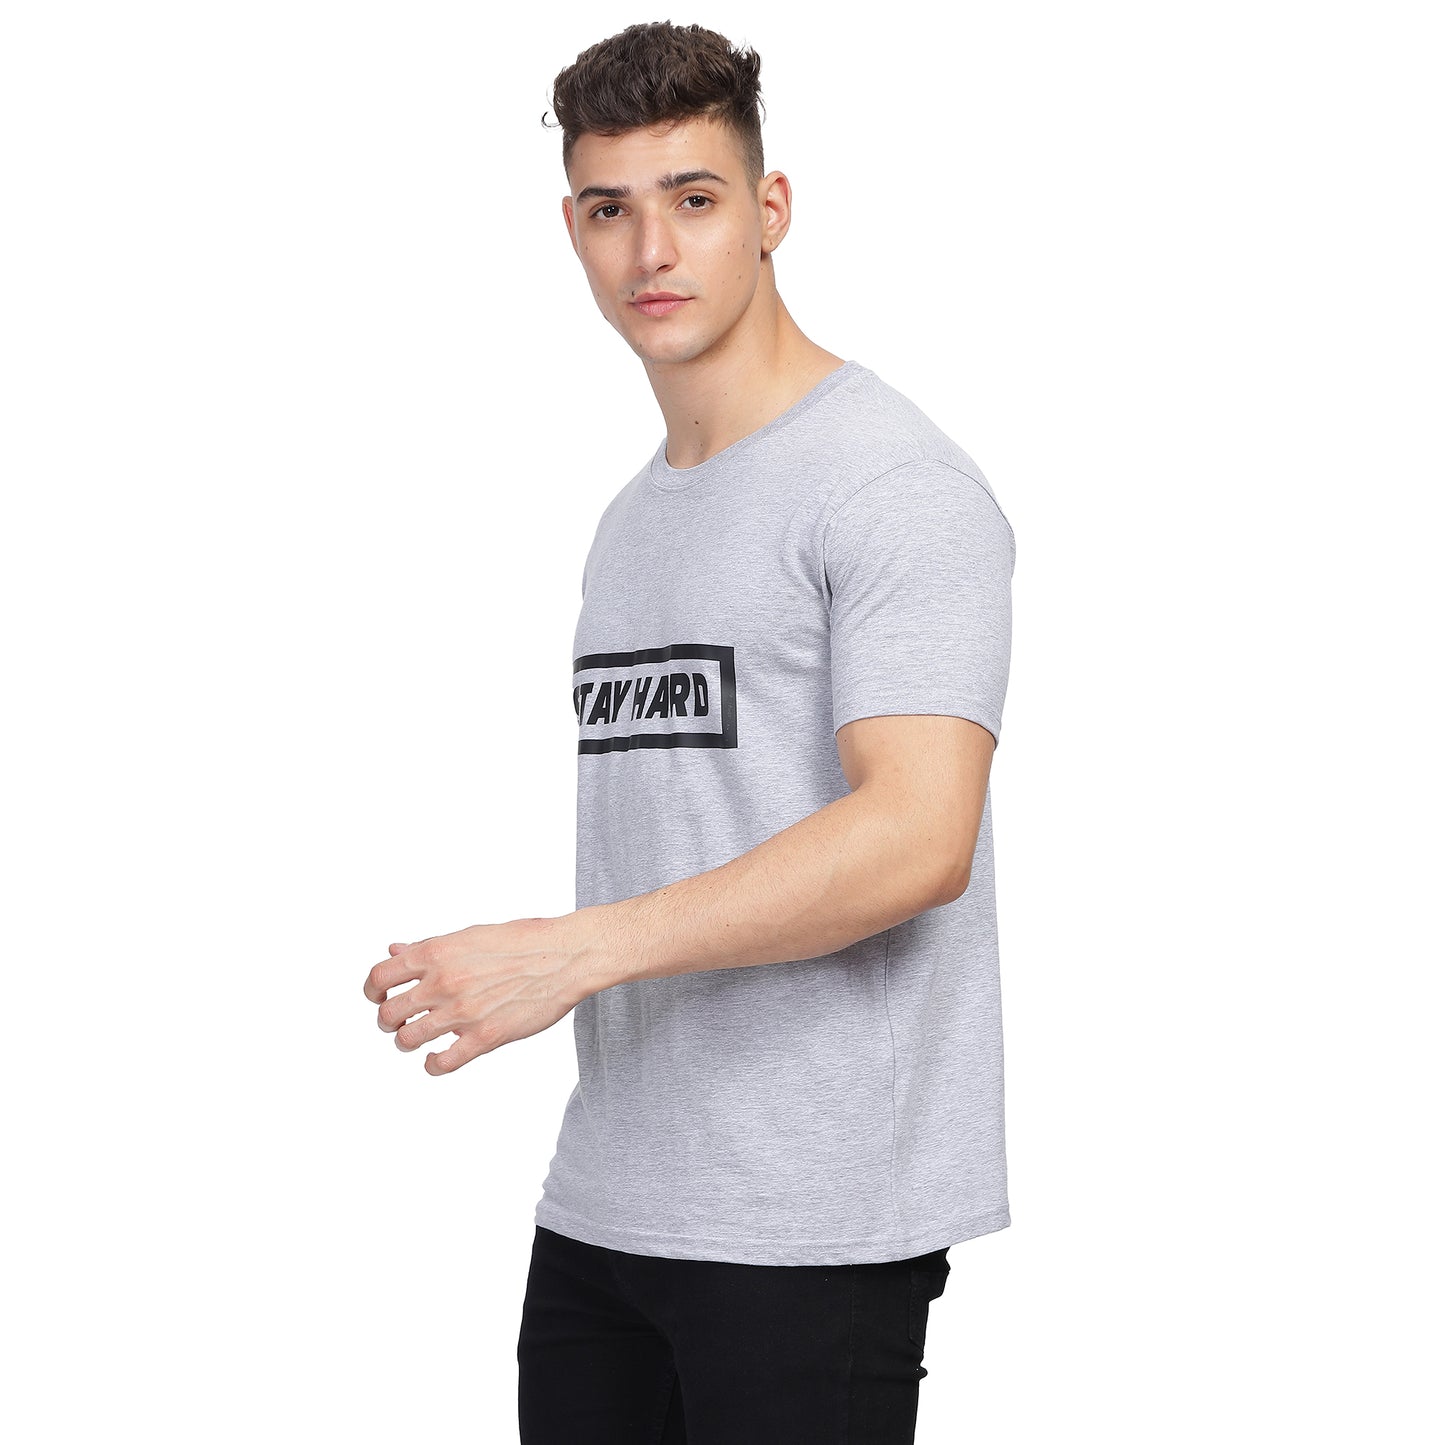 Stay Hard Classic Tee - Outlined